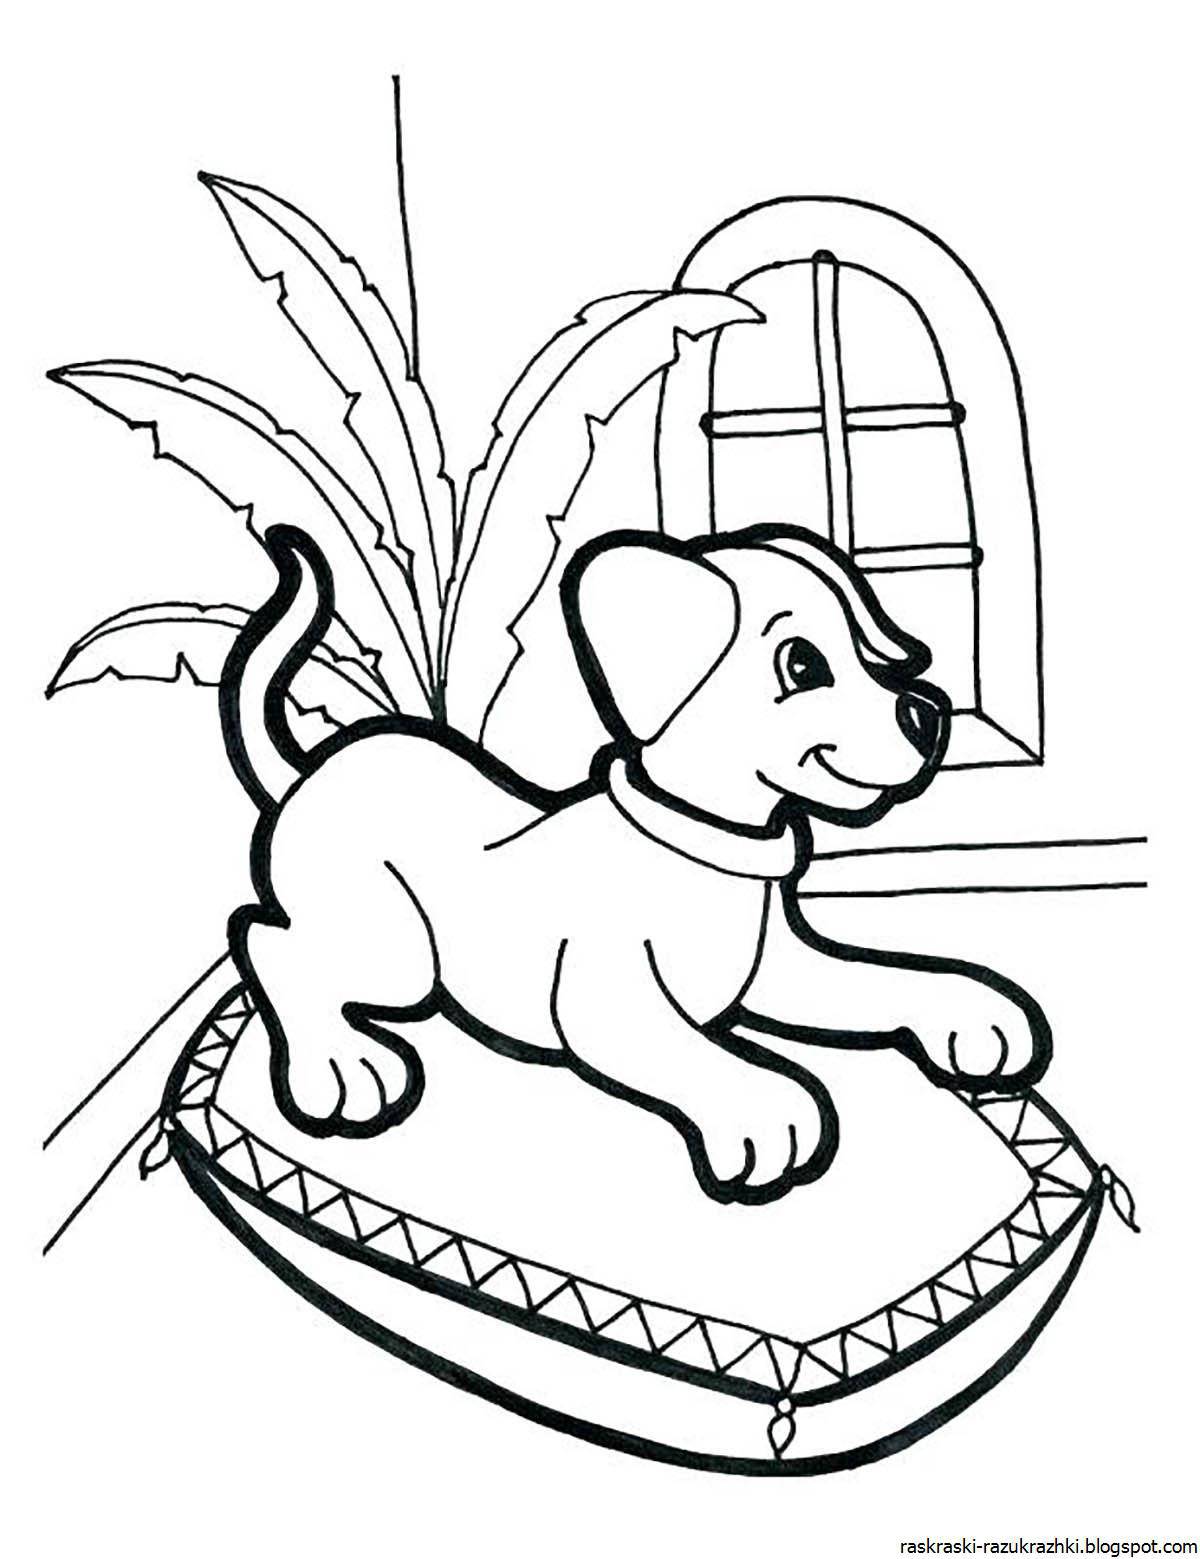 Colorful dog and cat coloring page